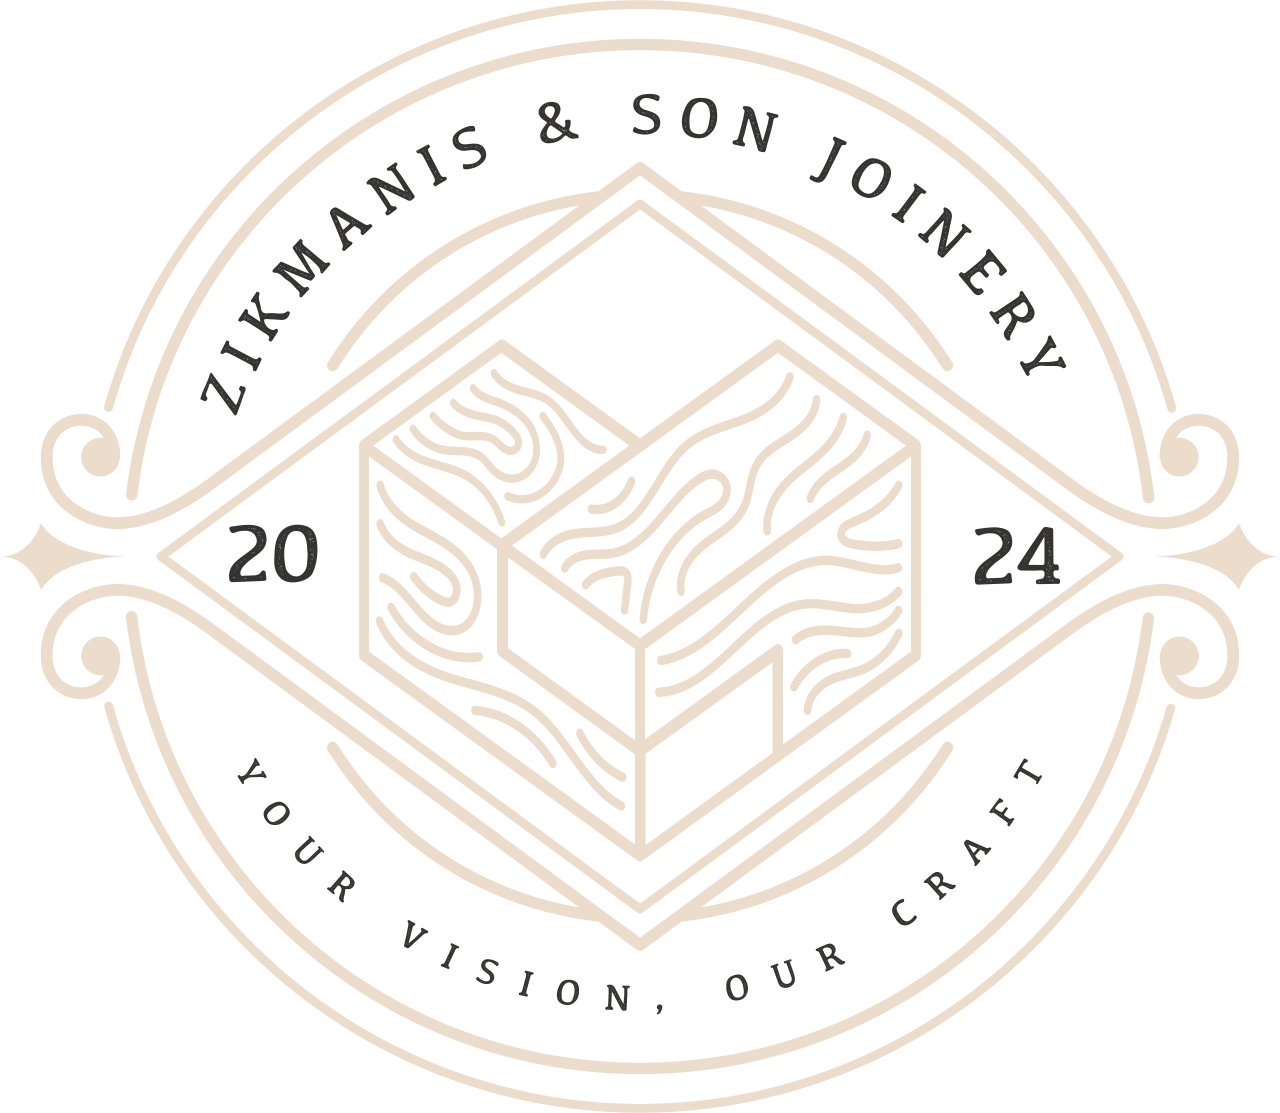 ZIKMANIS & SON JOINERY 's logo